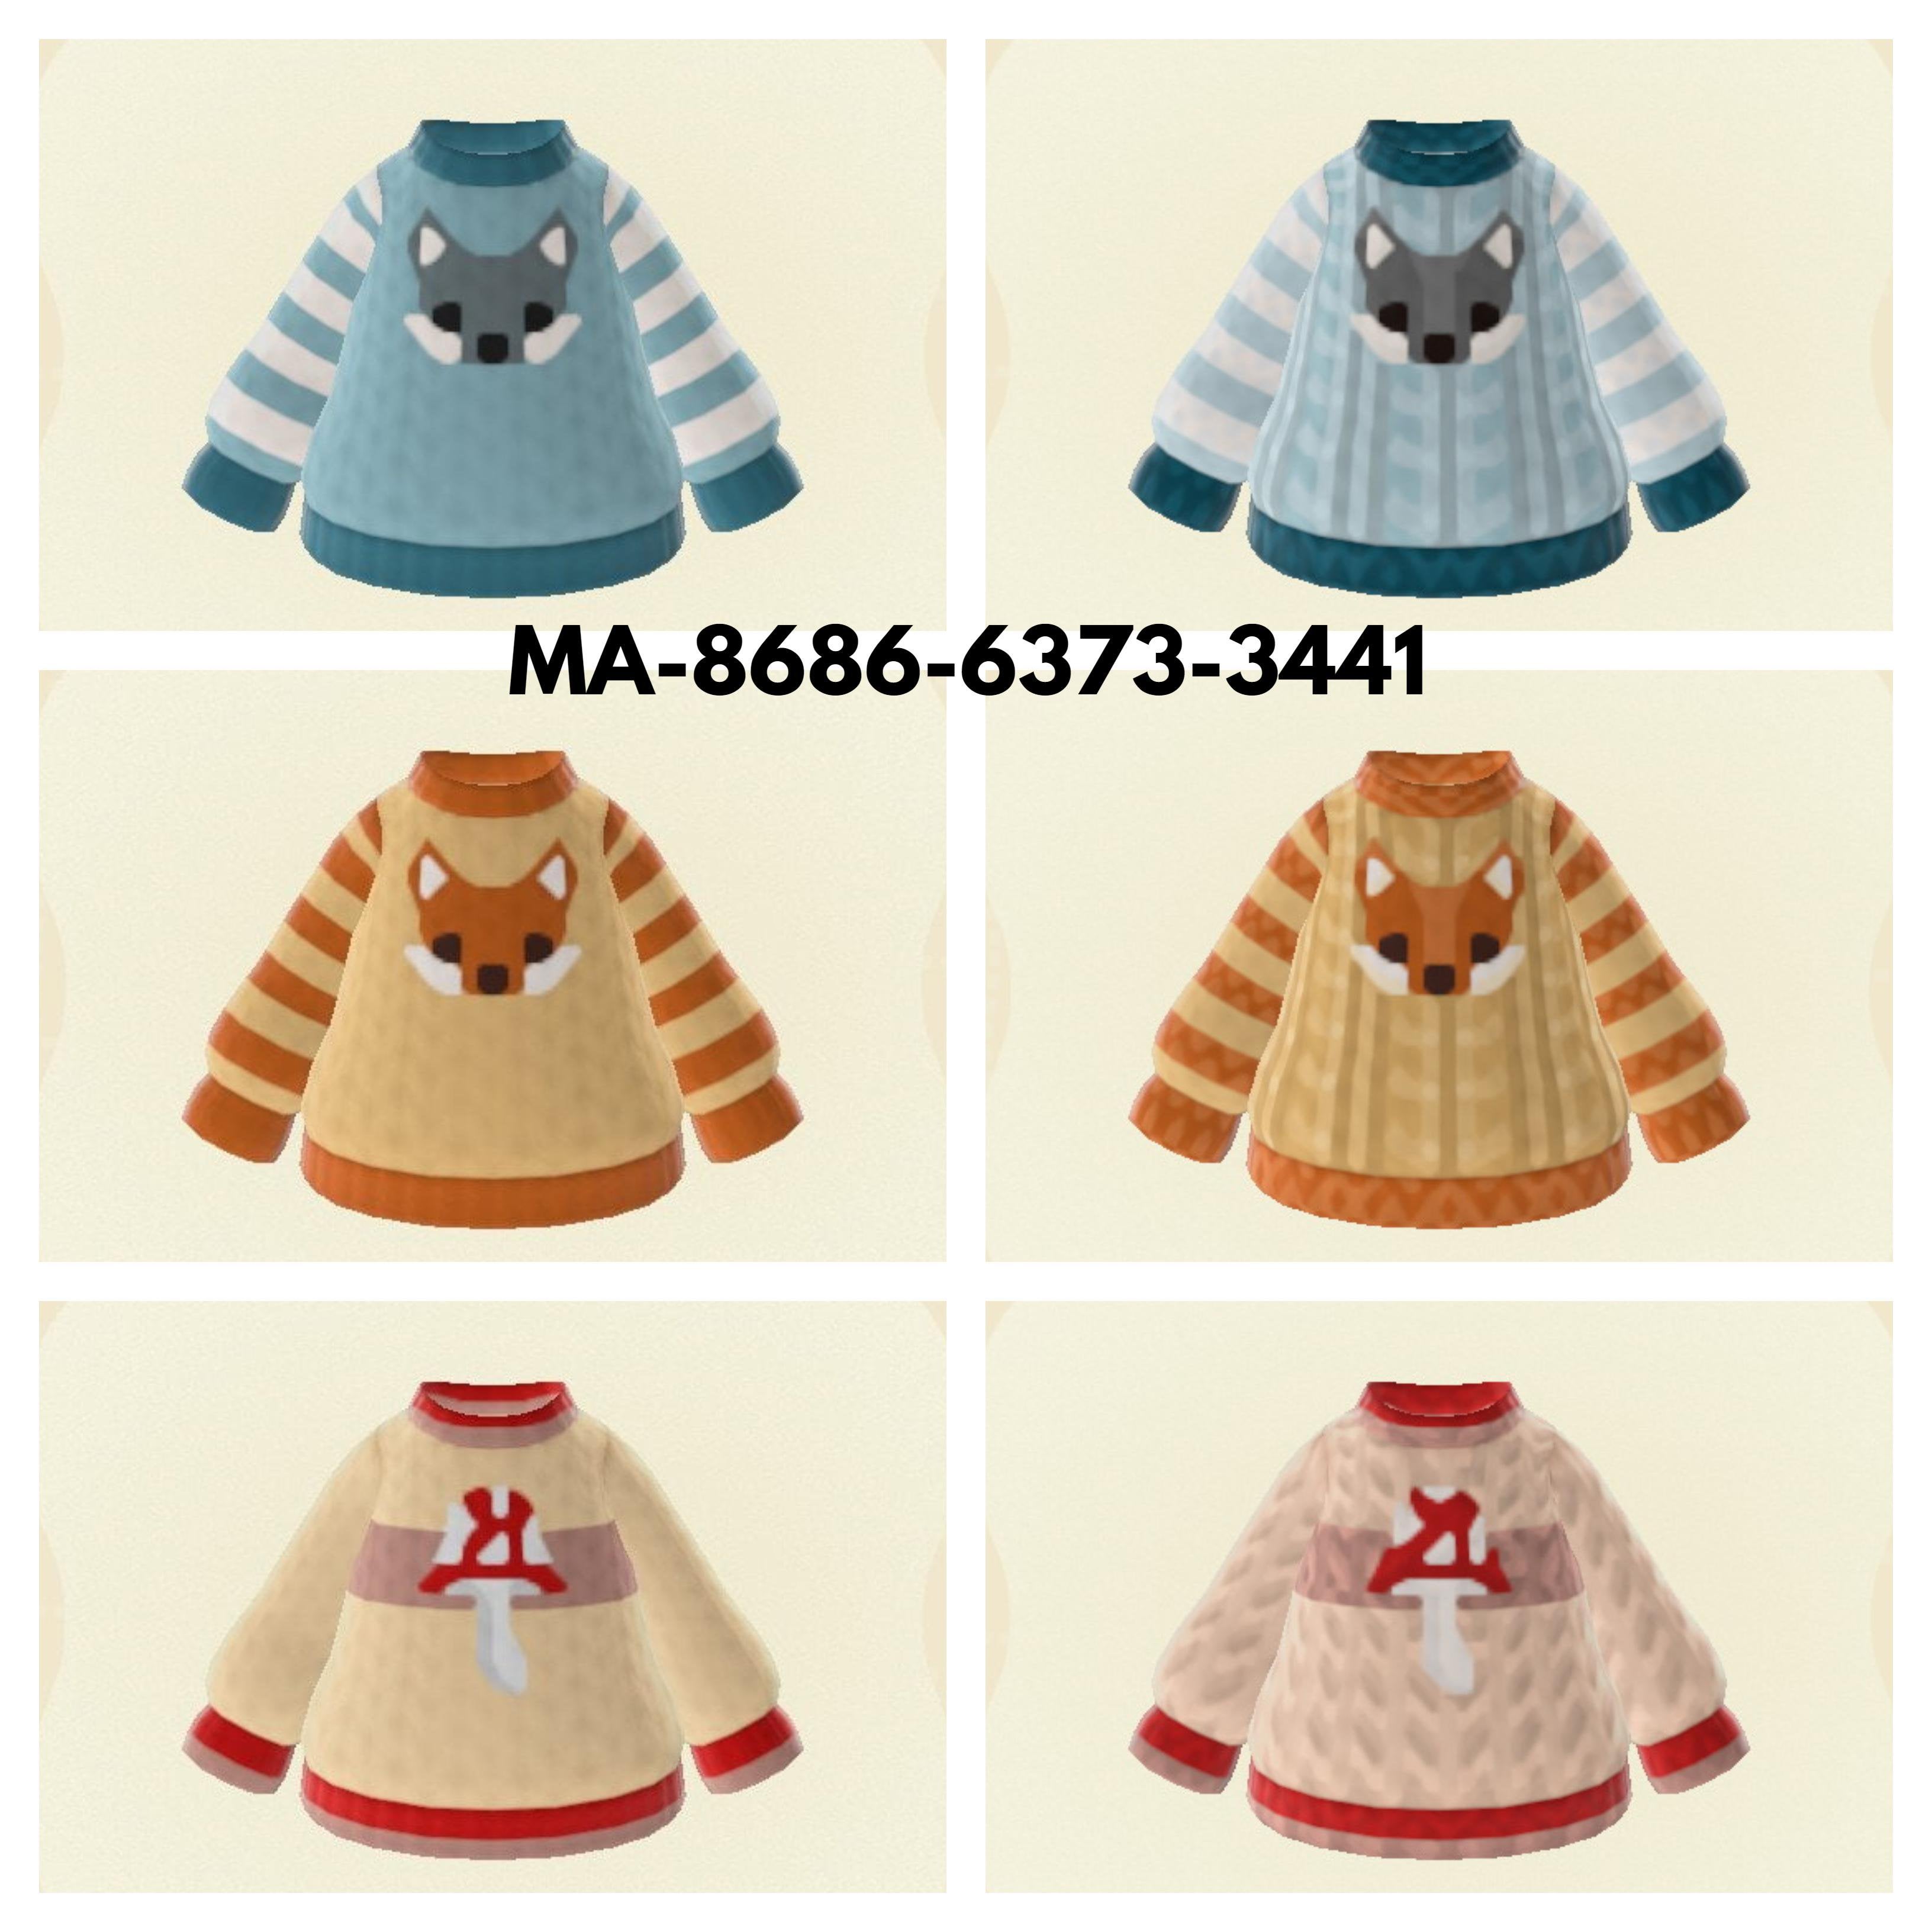 Animal Crossing Been updating my autumn and winter sweater designs